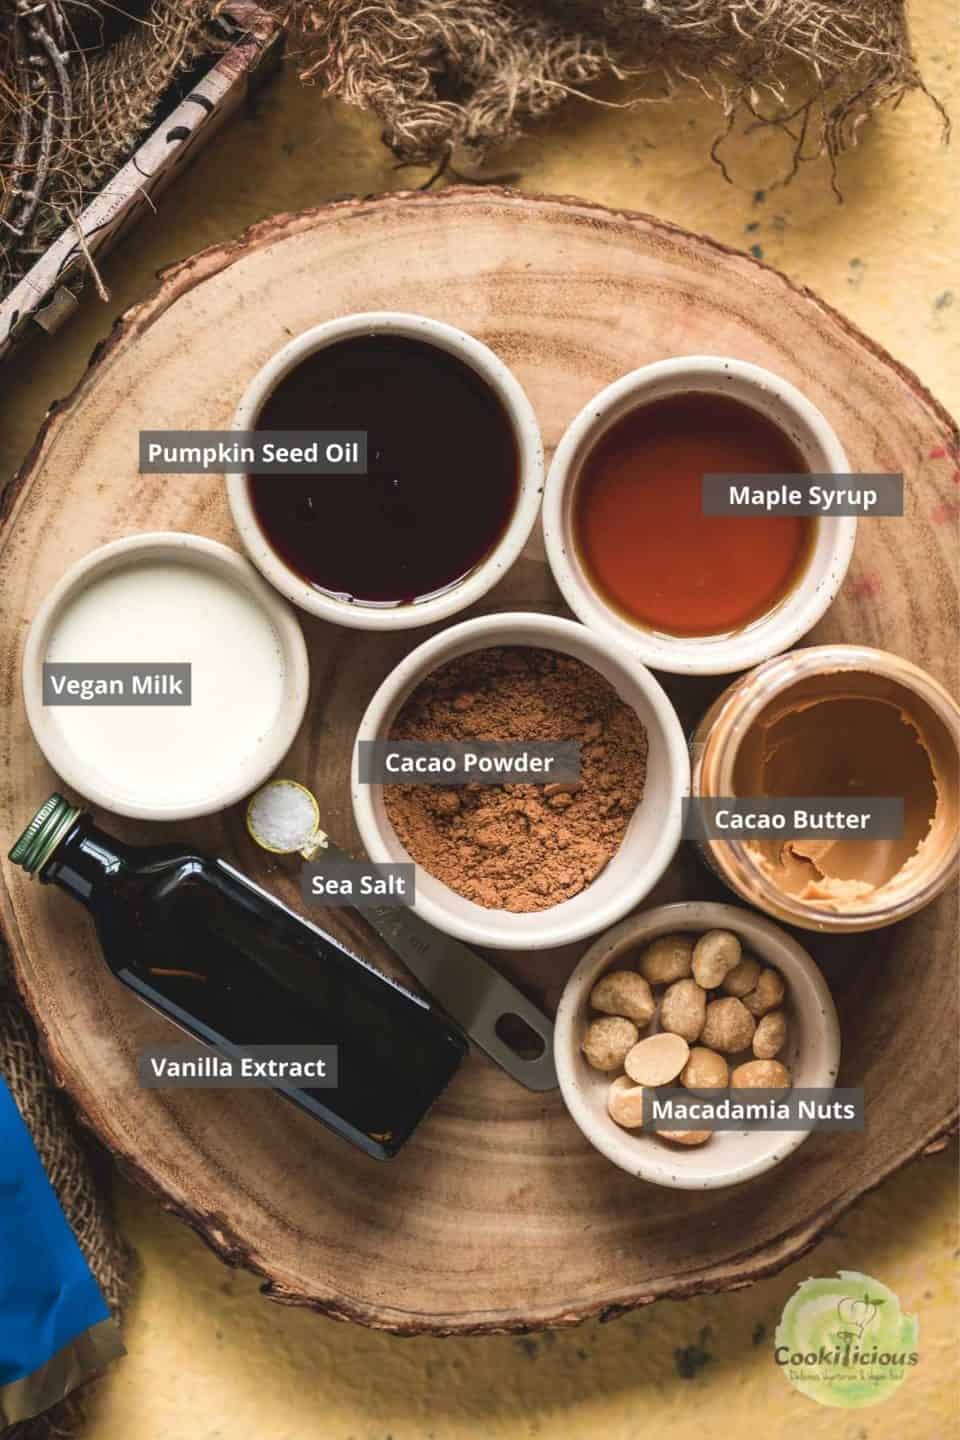 all the ingredients needed to make Vegan Chocolate Macadamia Bars Recipeplaced on a tray with labels on them